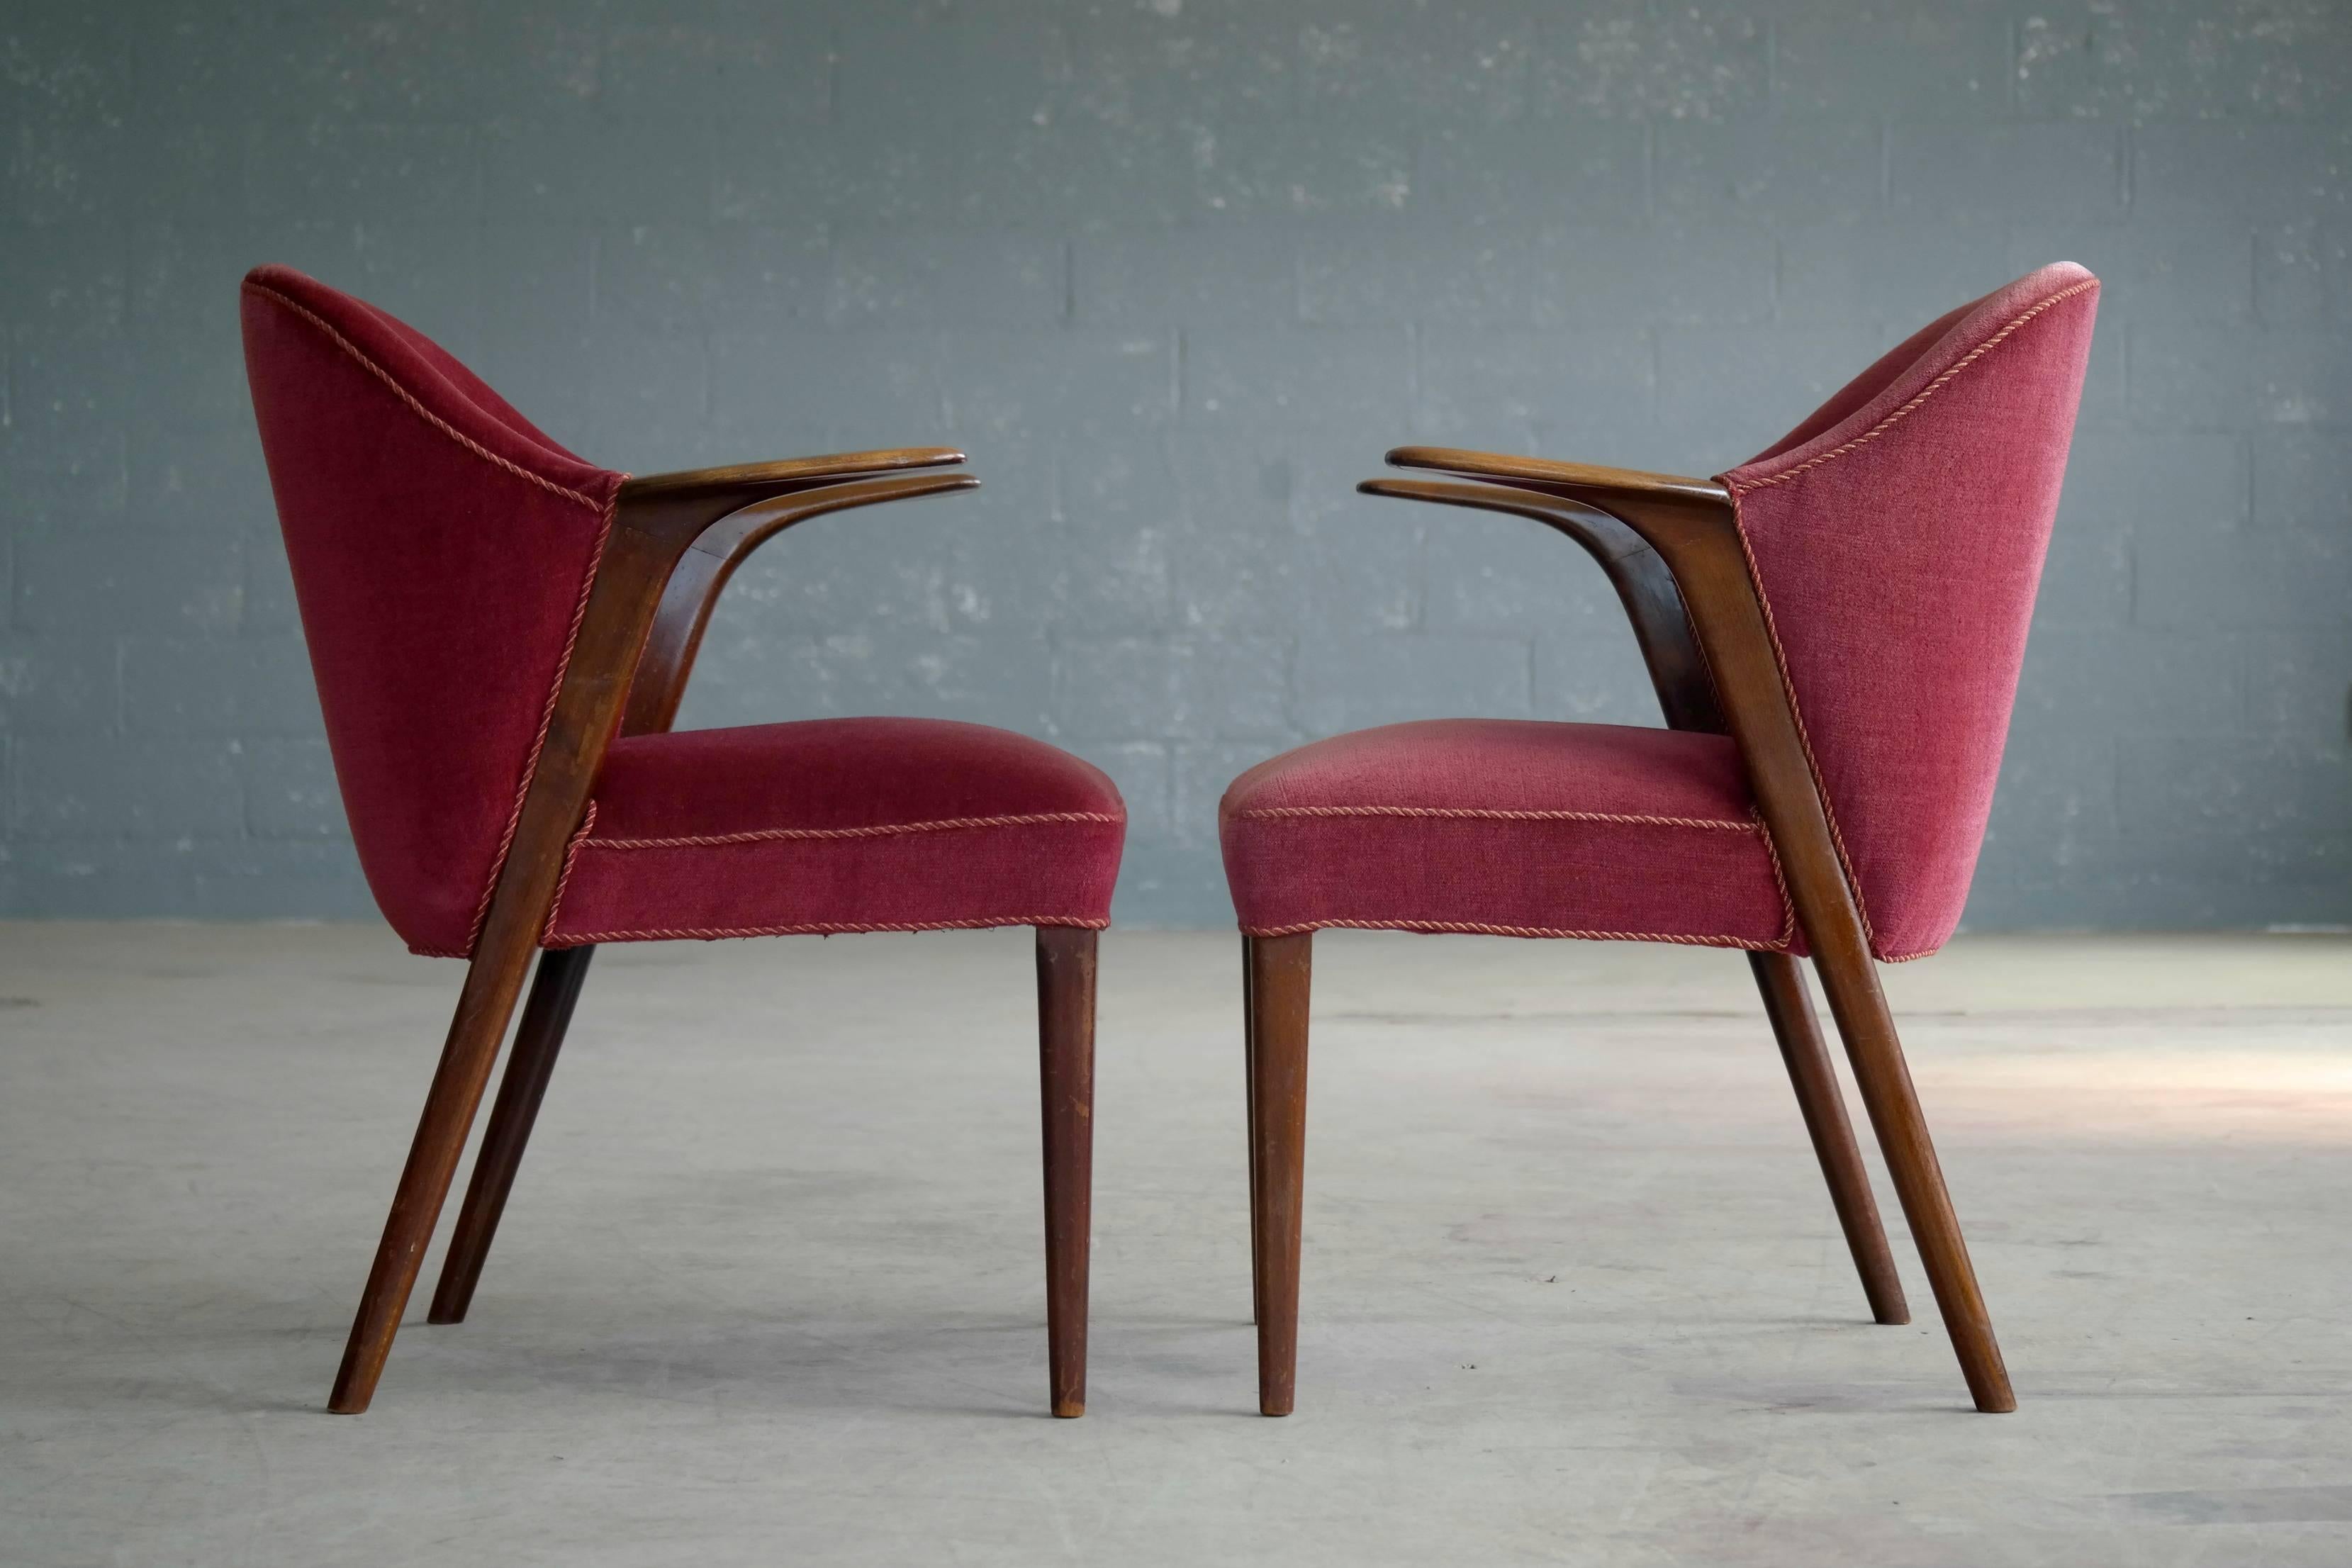 Wool Knud Risager Pair of Mama Bear Style Lounge or Armchairs for Slagelse Møbelværk